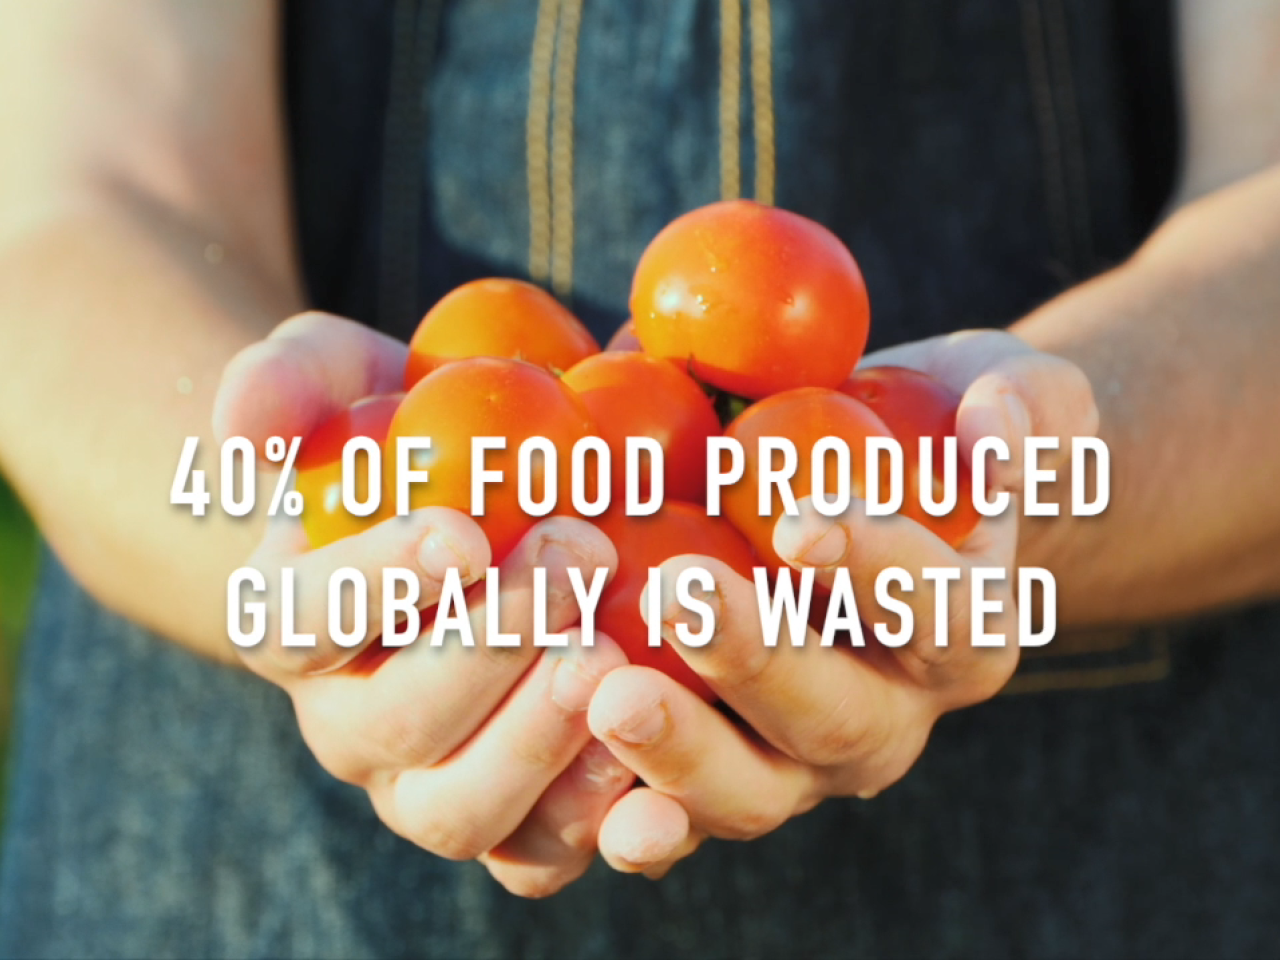 Two hands holding produce. "40% of food produced globally is wasted.